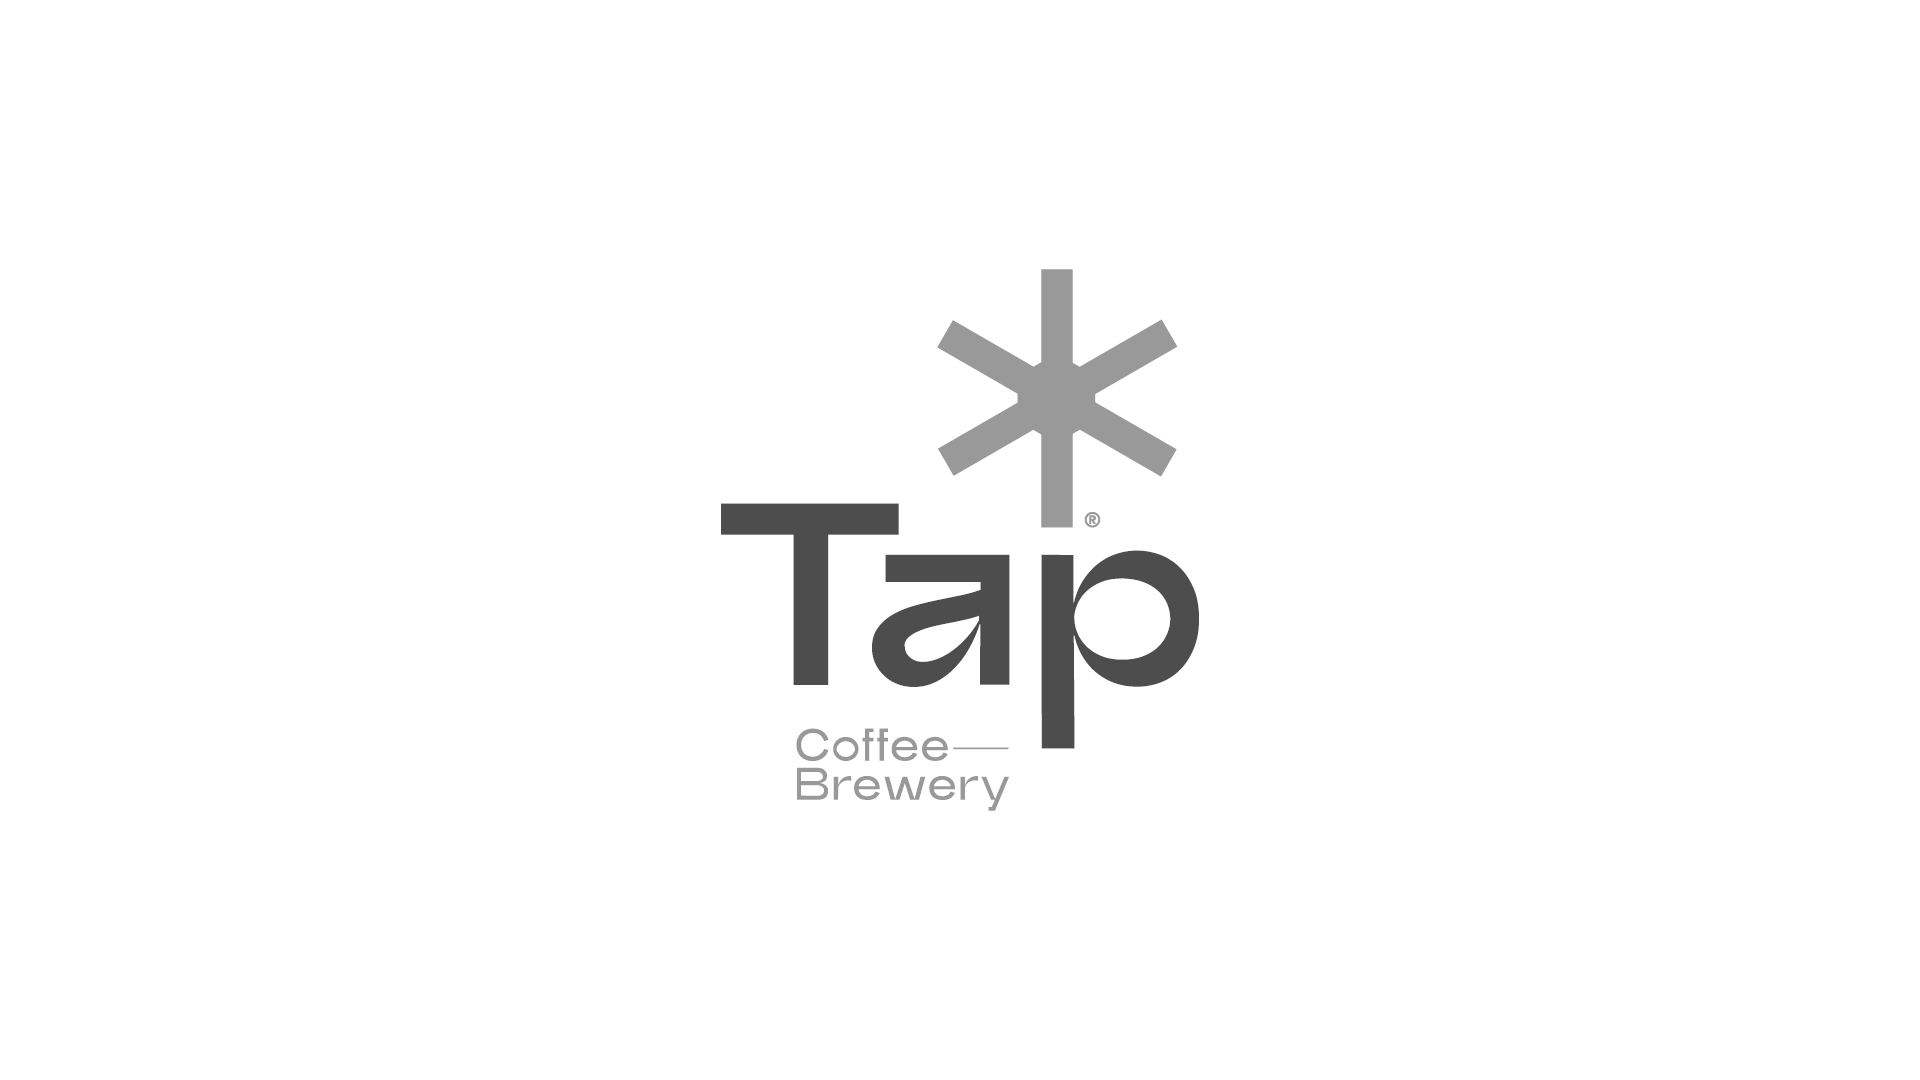 TAP Coffee Brewery on Behancec4790291907537.5e3d8761deb90.png